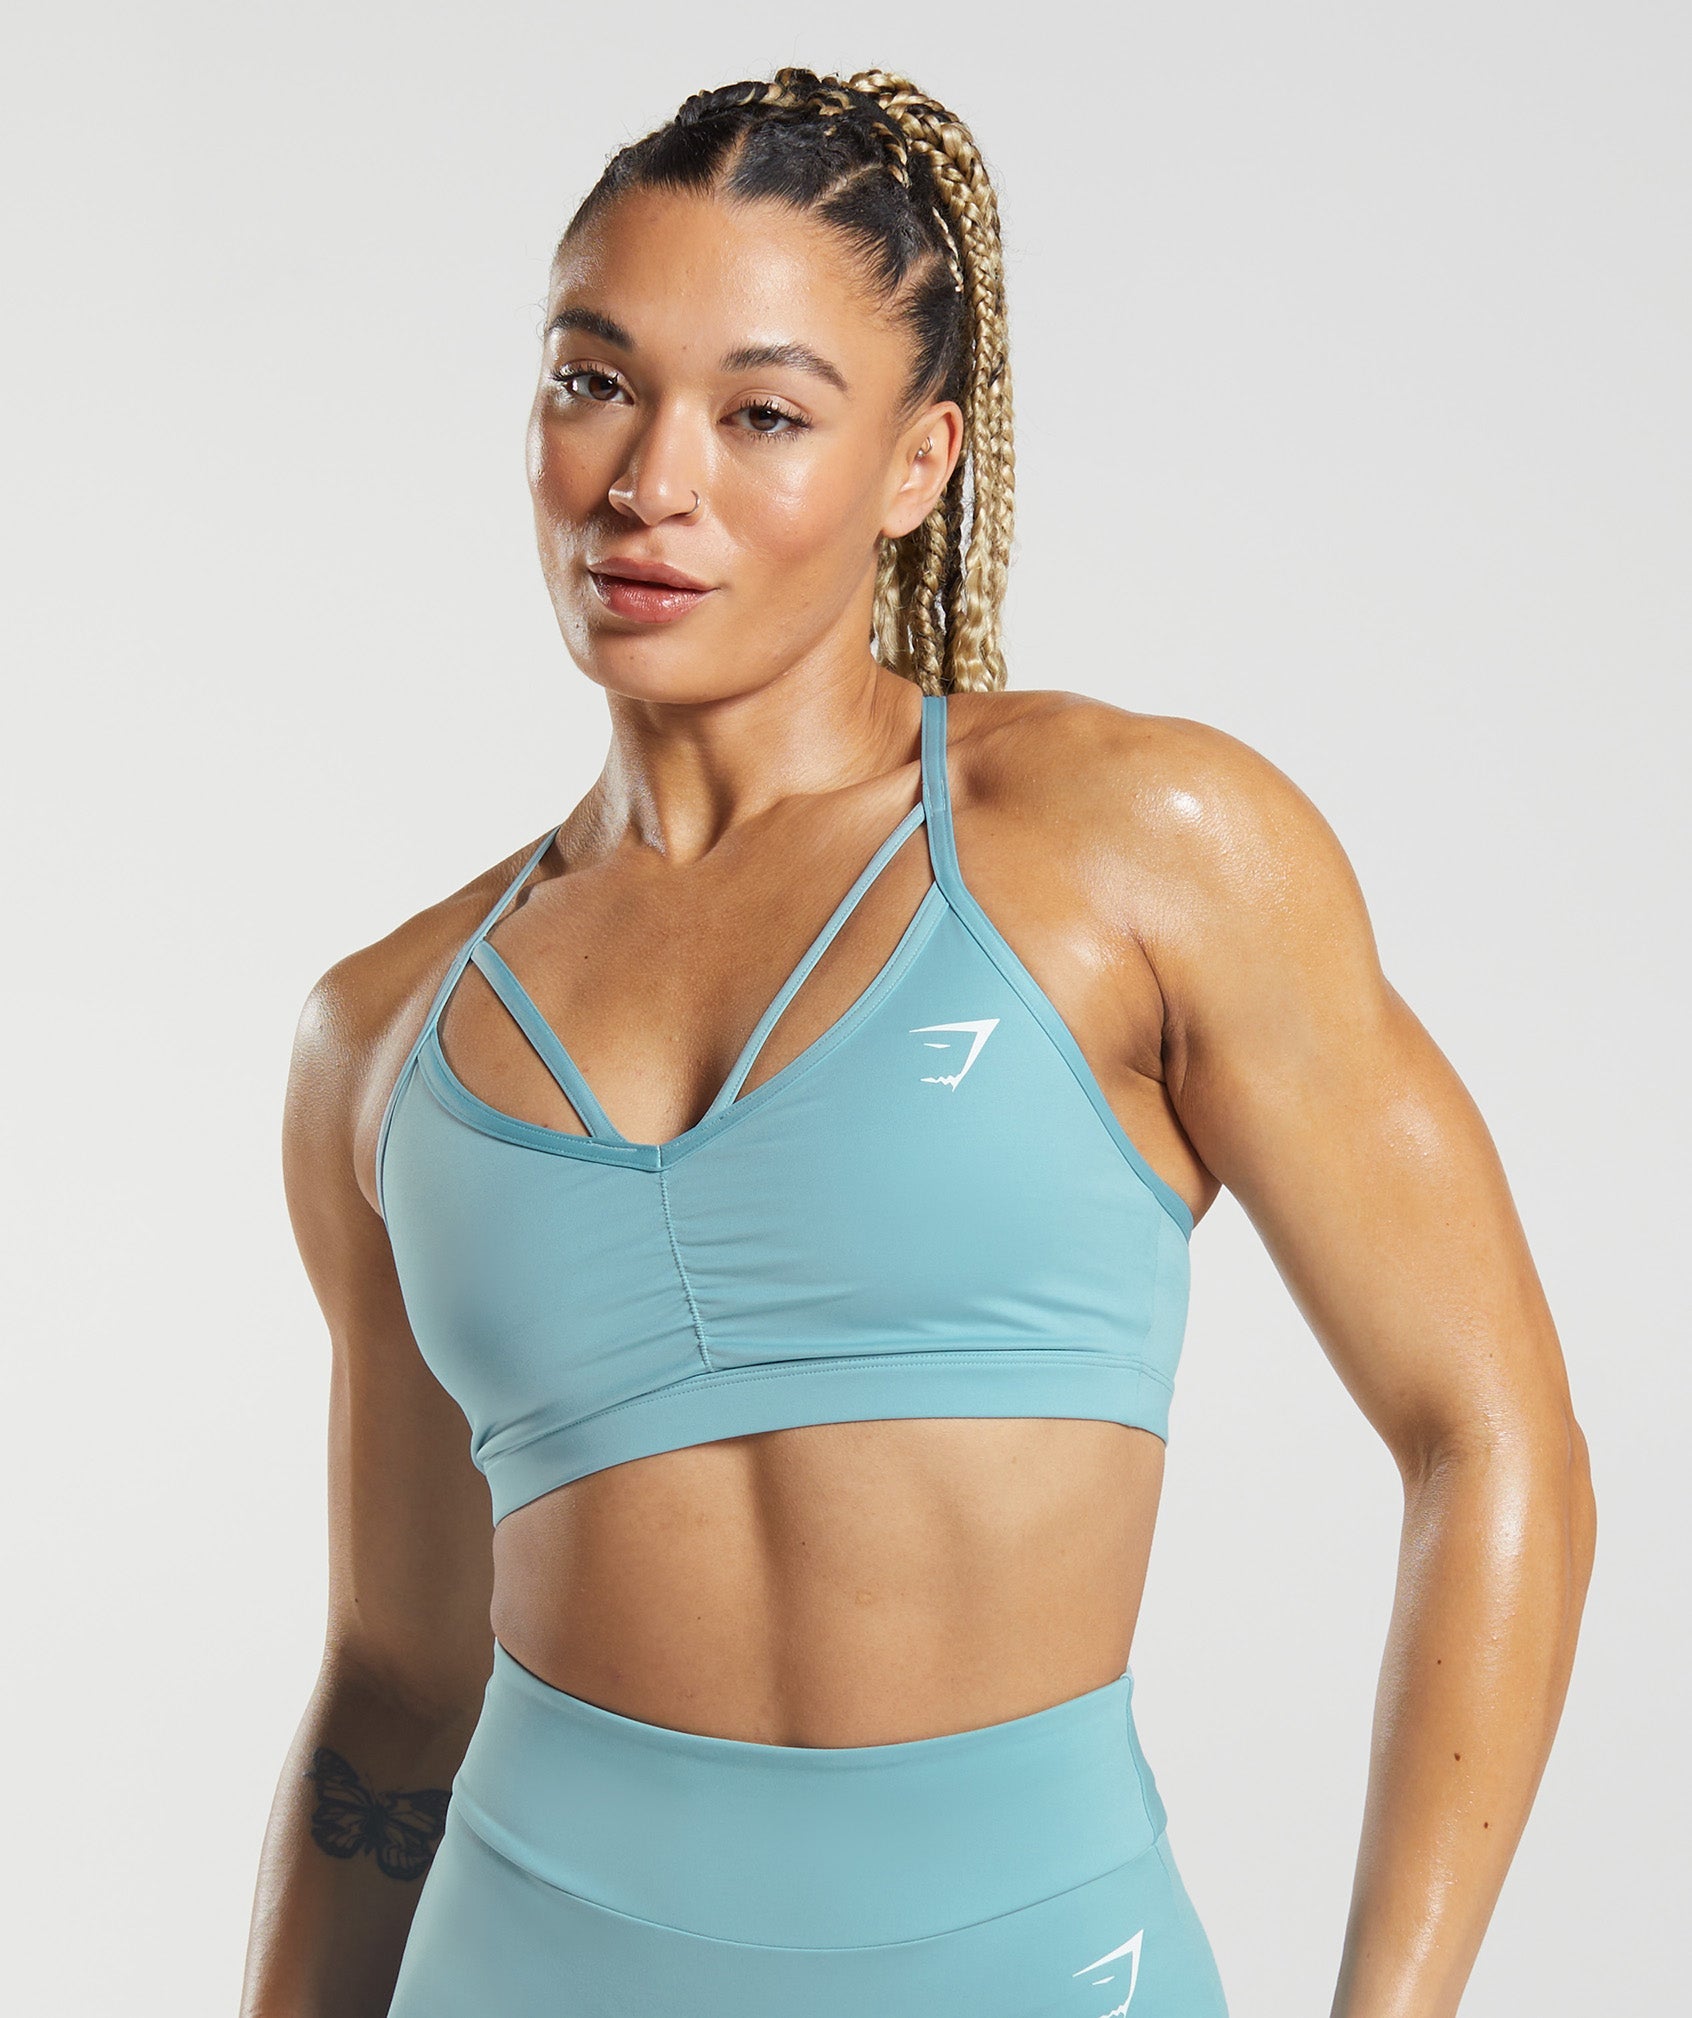 1,067 Sports Bra That Lifts And Separates Images, Stock Photos, 3D